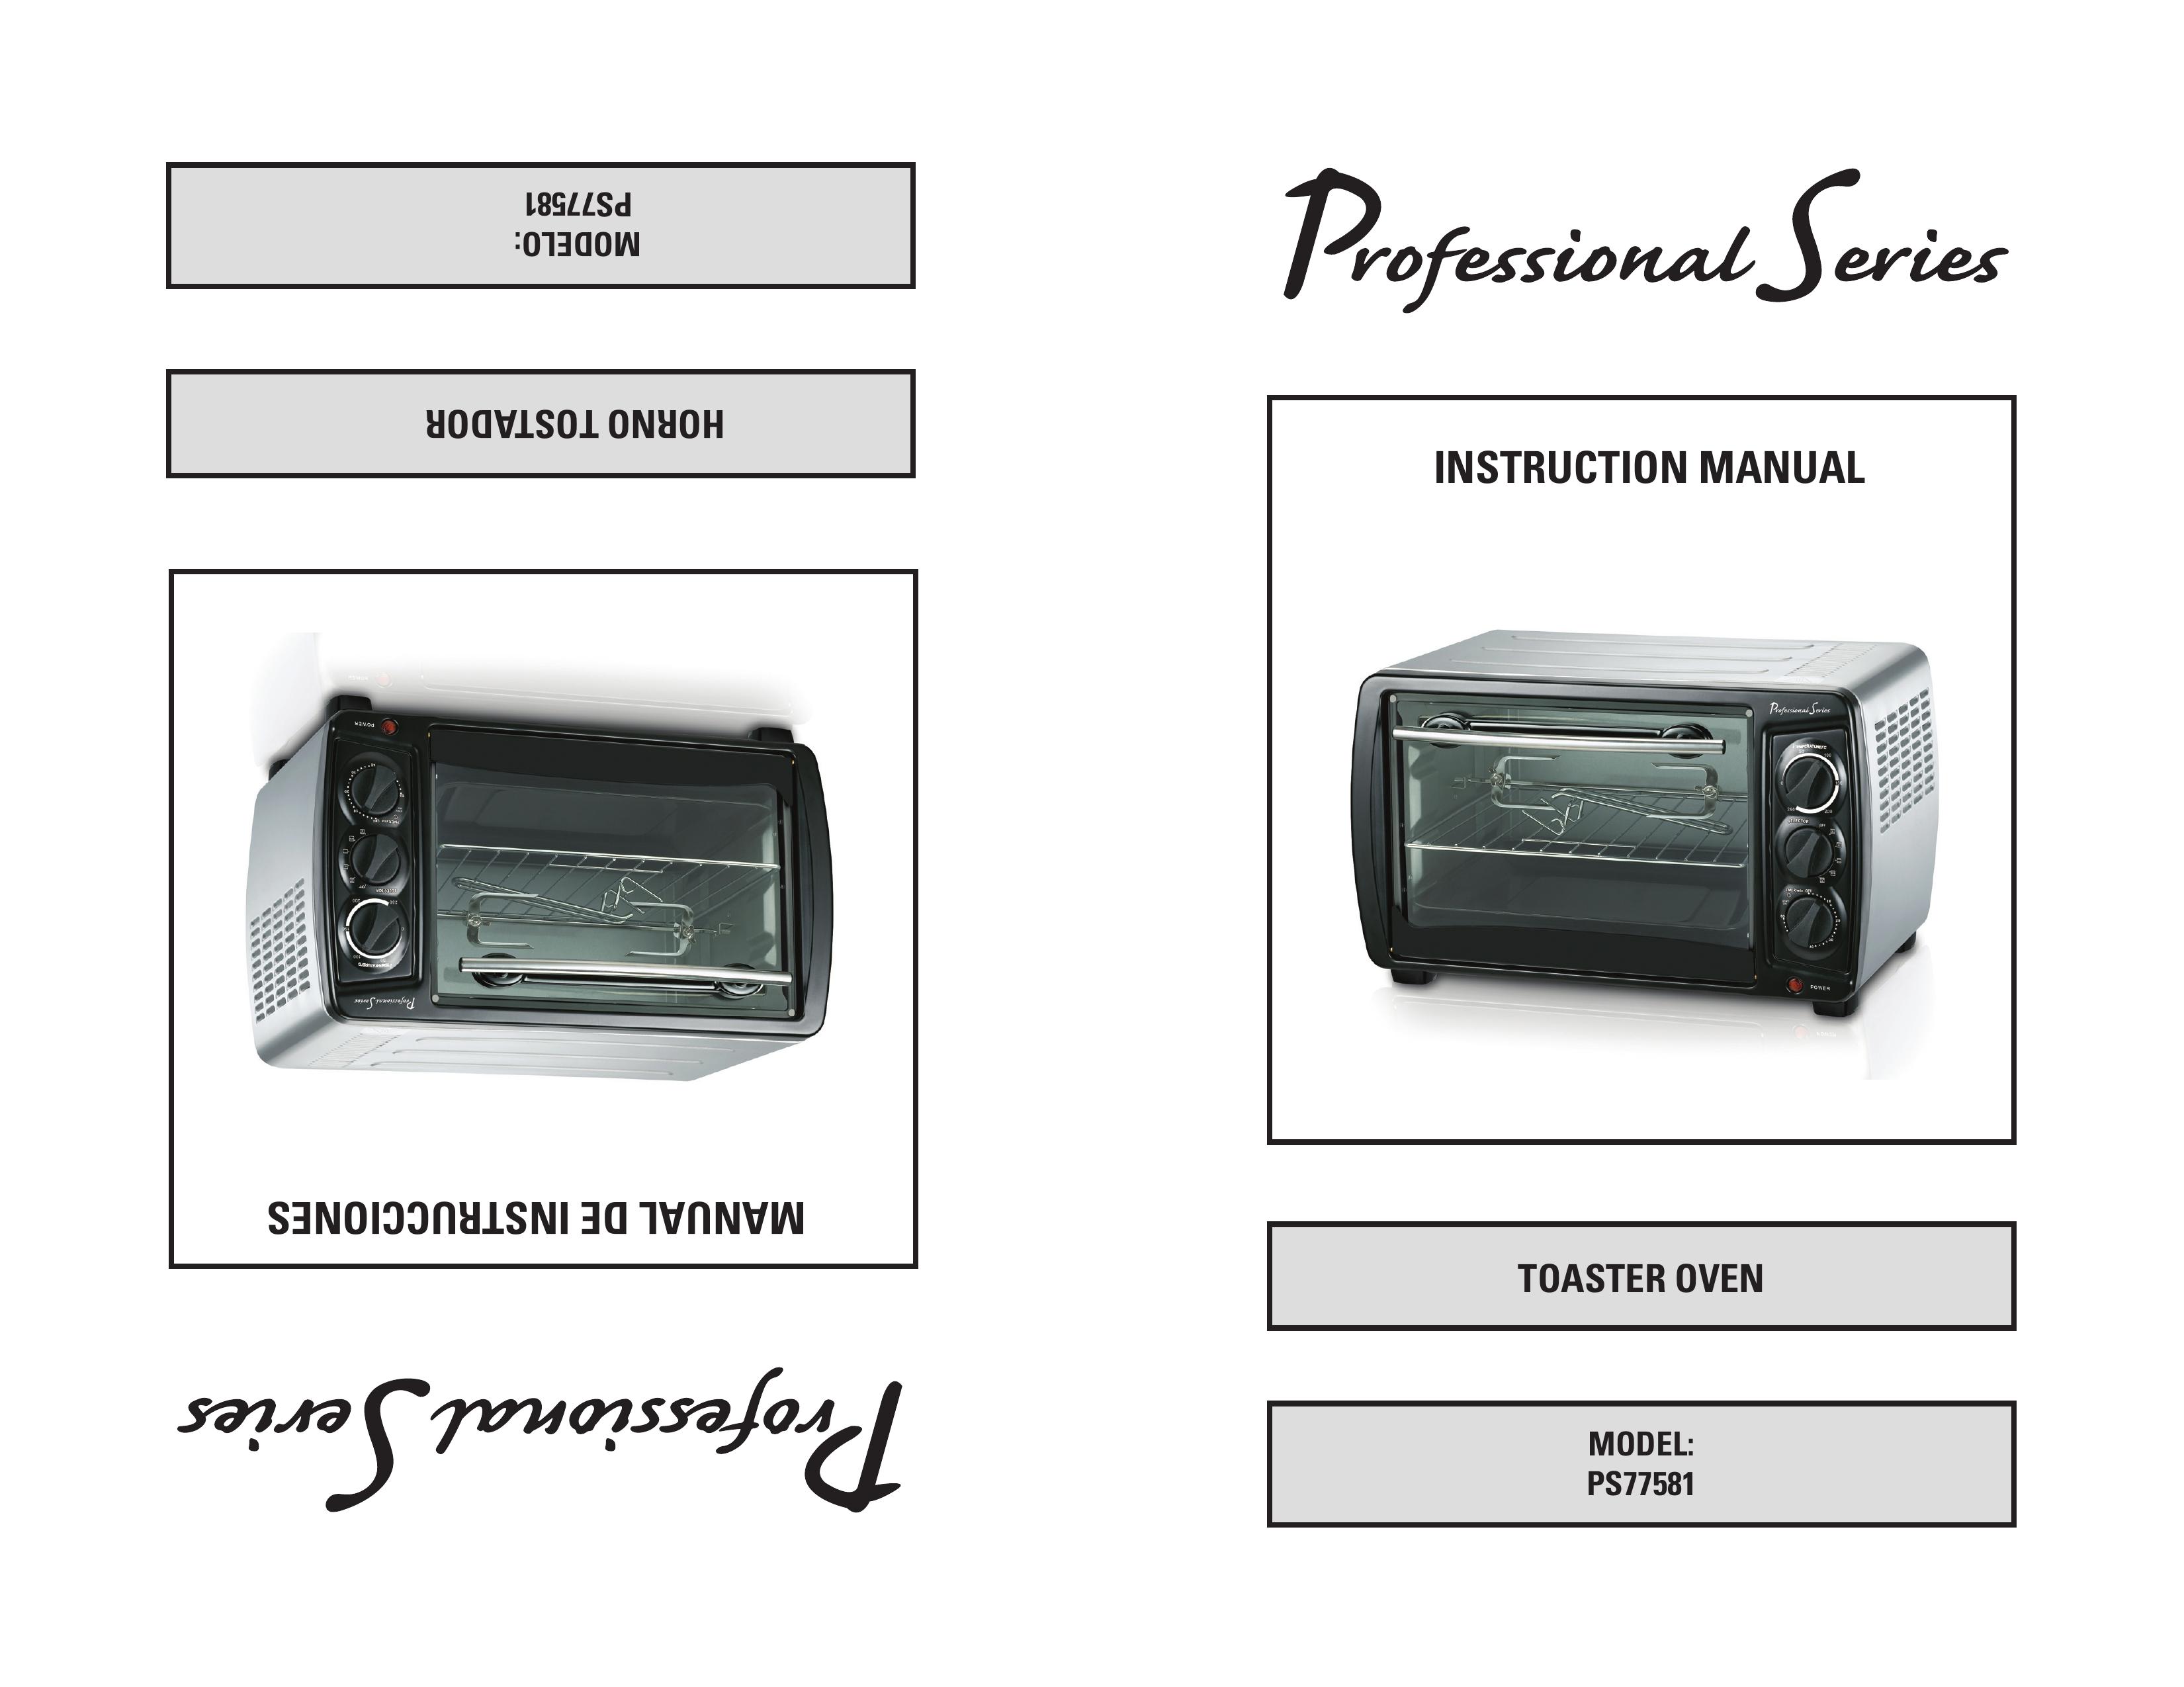 Professional Series PS77581 Toaster User Manual